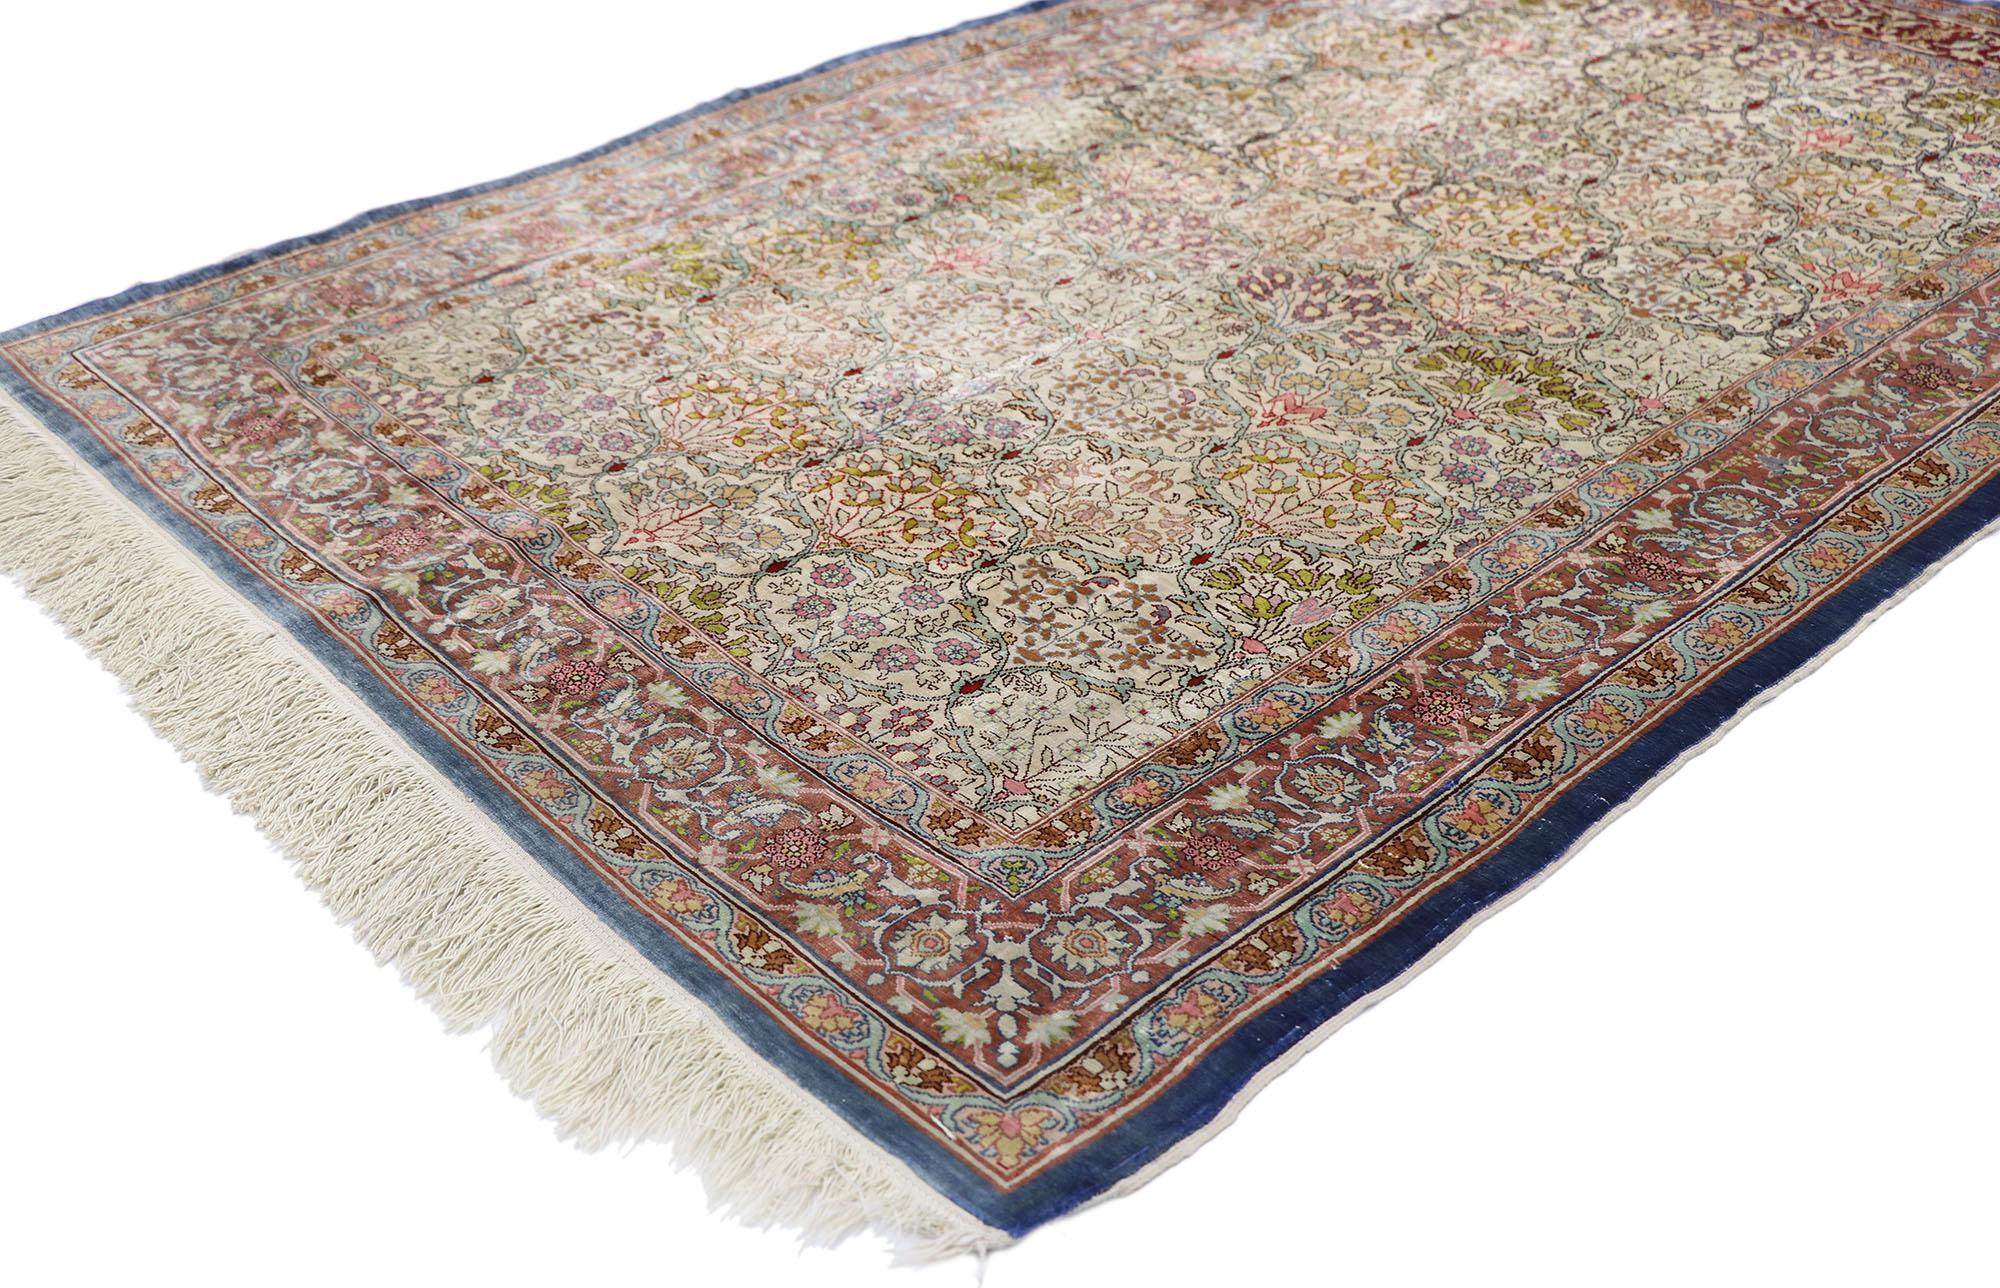 77795, vintage Turkish silk Hereke rug with Art Nouveau Rococo style. Give the look of woven wonders and warmth with this hand knotted vintage Turkish silk Hereke rug. The abrashed beige field features an all-over botanical millefleur trellis